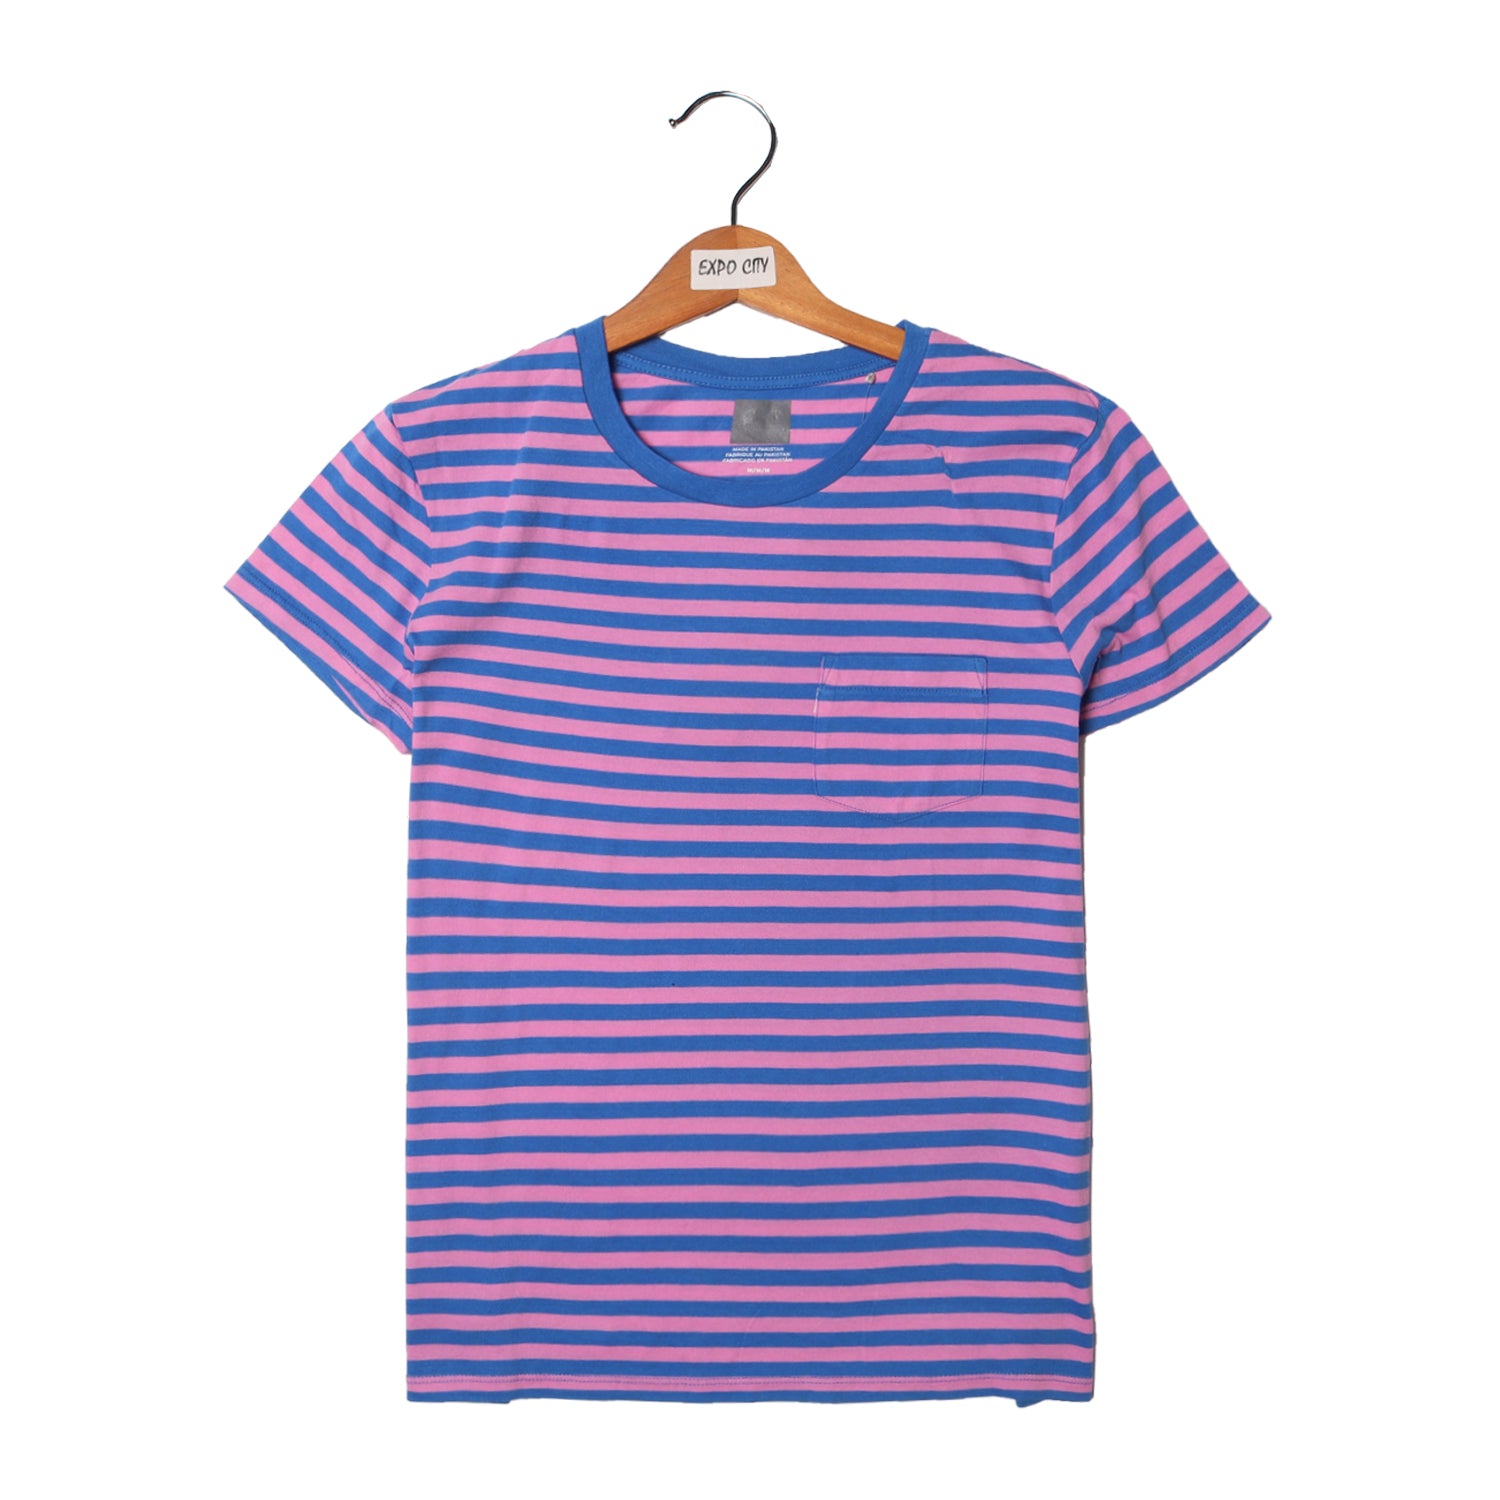 NEW PURPLE WITH BLUE STRIPES & POCKET HALF SLEEVES T-SHIRT FOR GIRLS